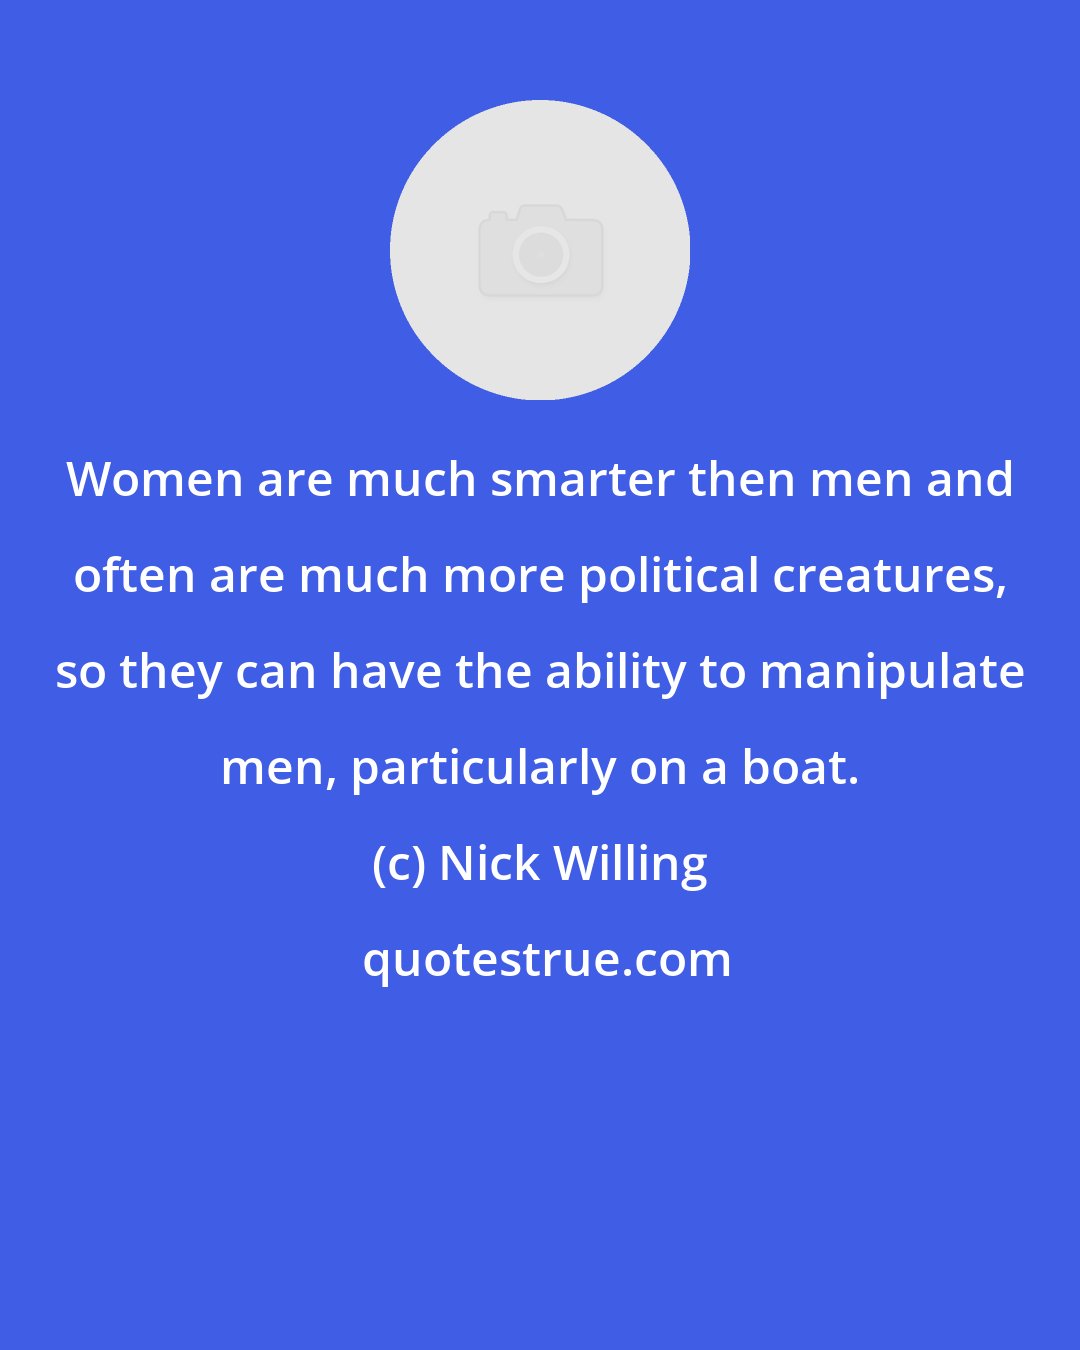 Nick Willing: Women are much smarter then men and often are much more political creatures, so they can have the ability to manipulate men, particularly on a boat.